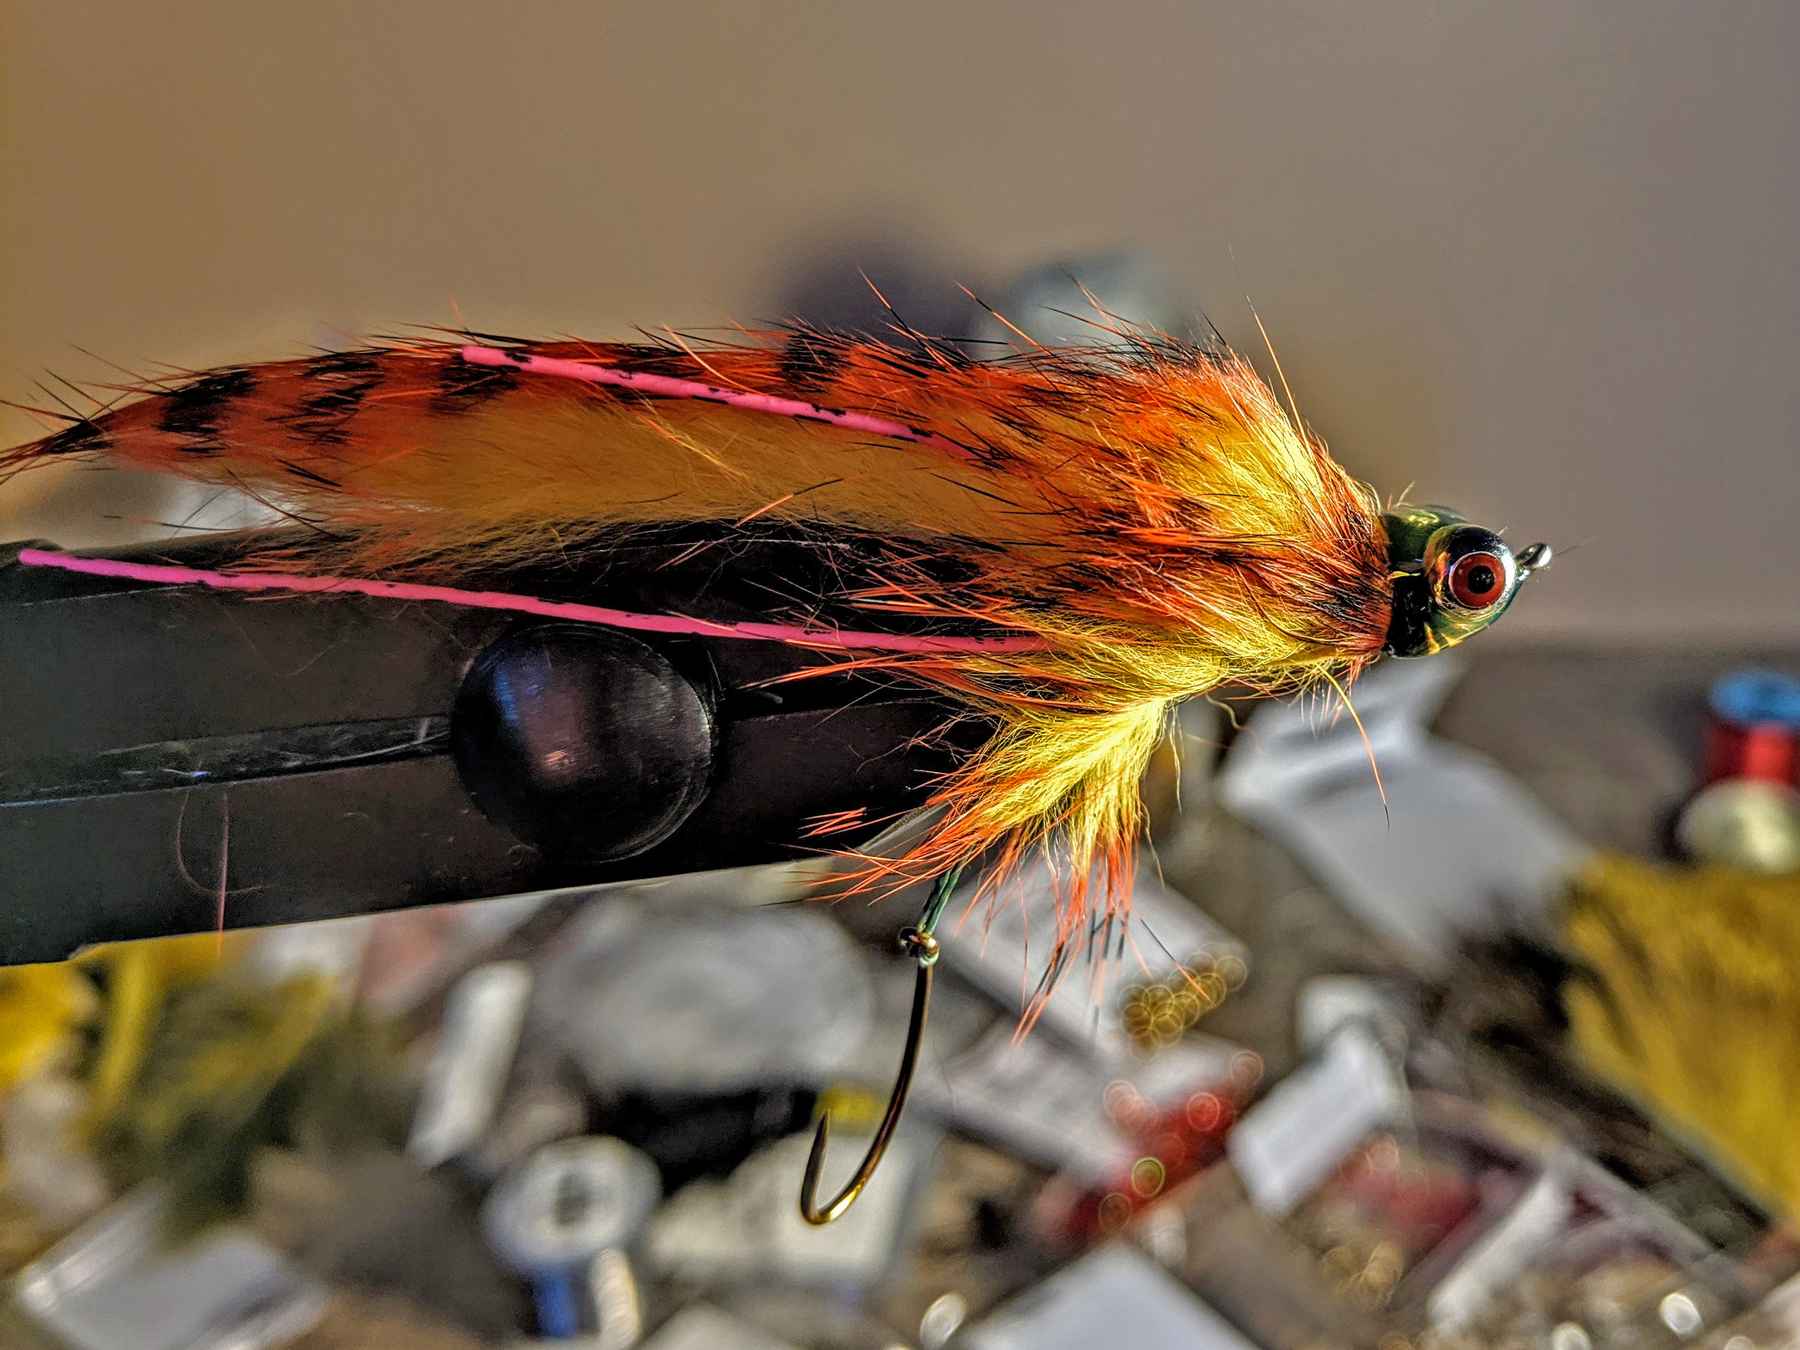 Enter Our Fly Tying Contest and Get Your Fly into the Orvis